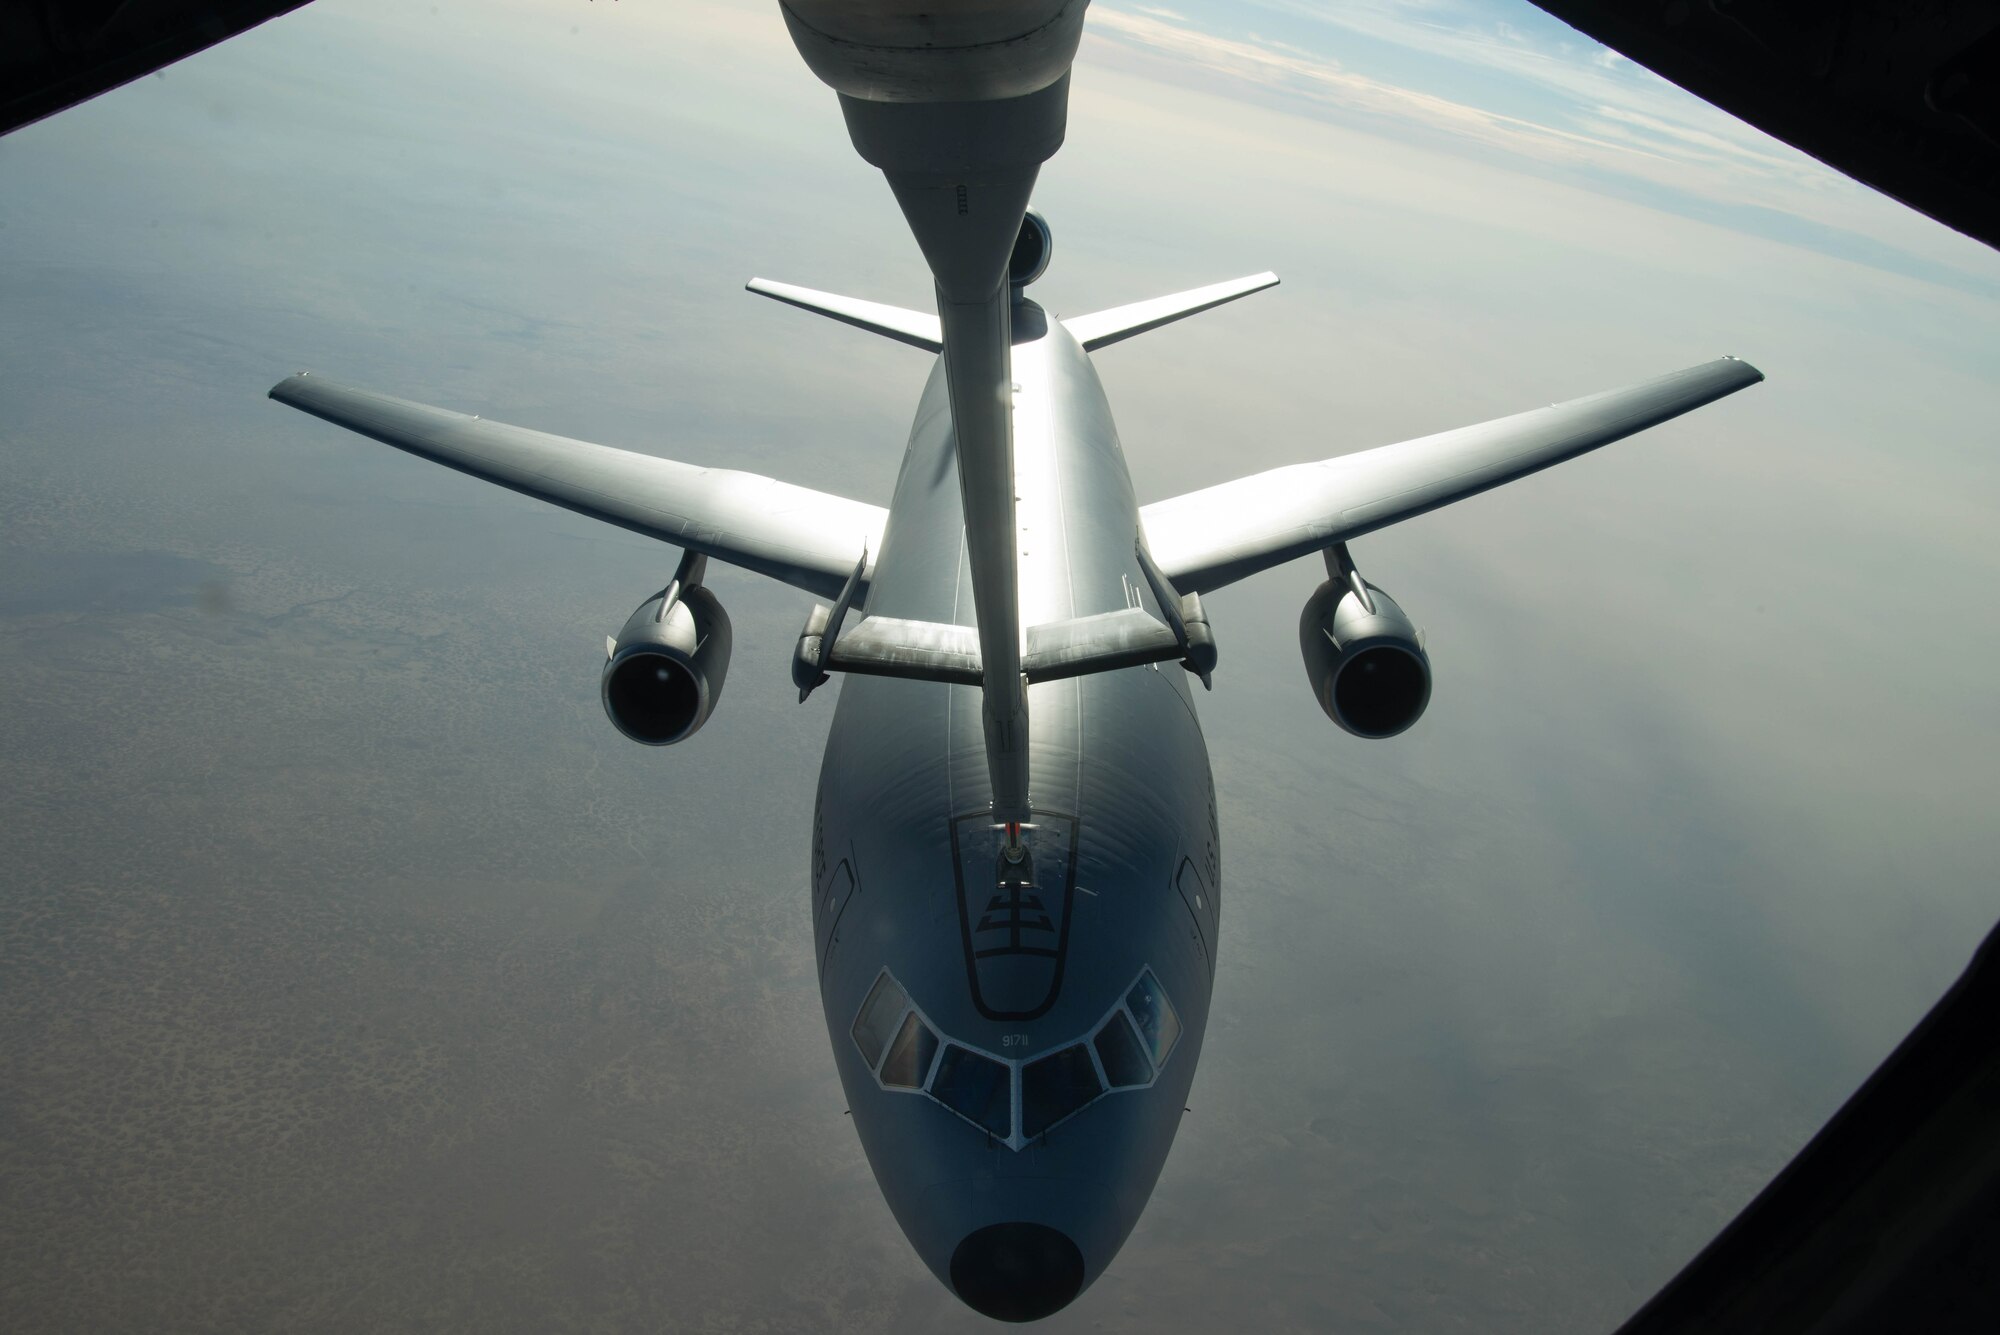 A U.S. Air Force KC-10 Extender refuels near Mosul, Iraq, Nov. 20, 2016.  The KC-10 Extender is an Air Mobility Command advanced tanker and cargo aircraft designed to provide increased global mobility for U.S. and Coalition armed forces. (U.S. Air Force photo by Staff Sgt. R. Alex Durbin)